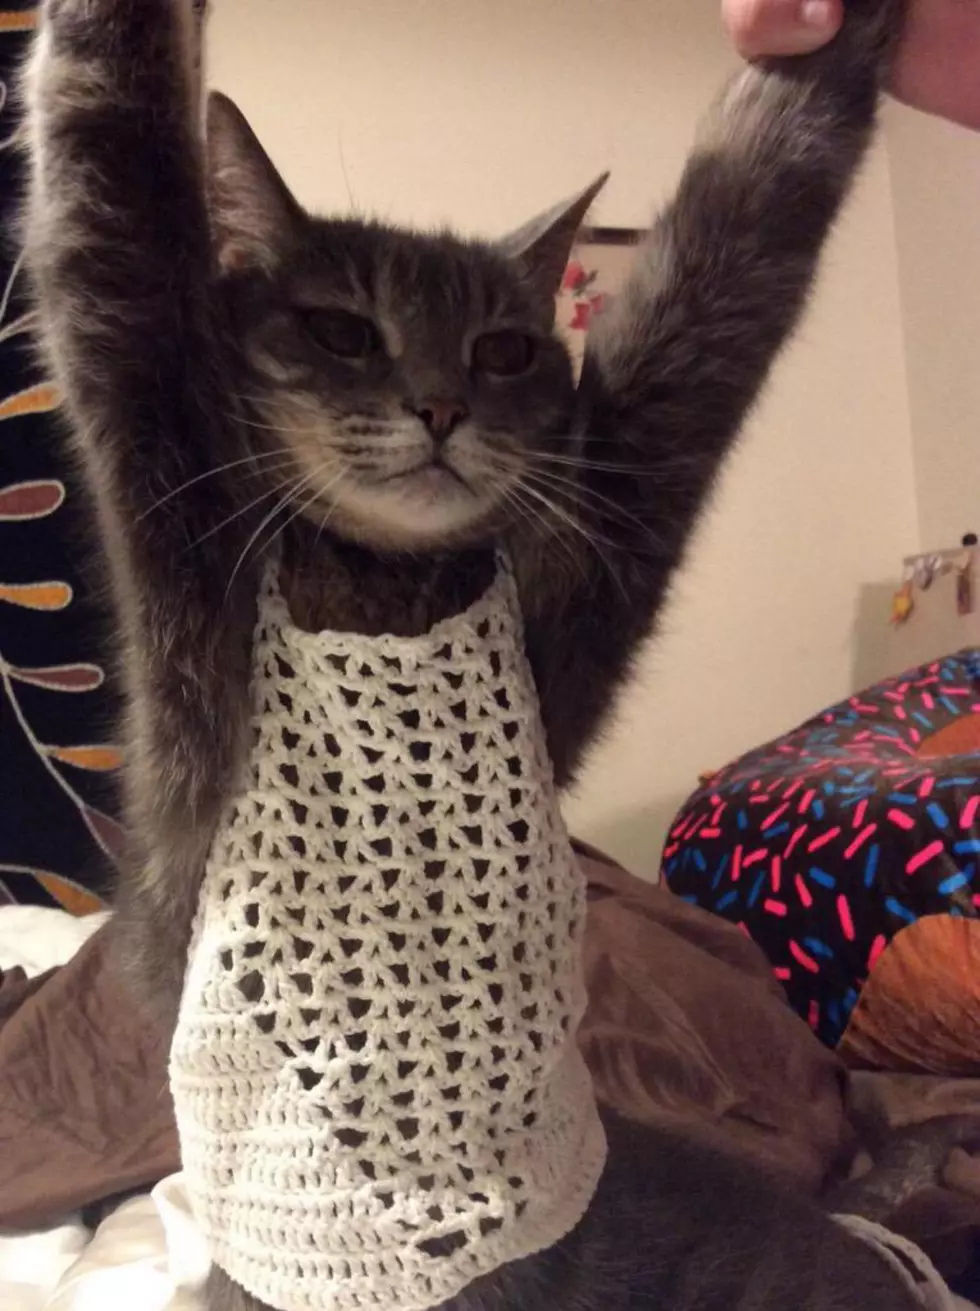 Mom Reviews Daughter’s Crop Top With Help From Cat